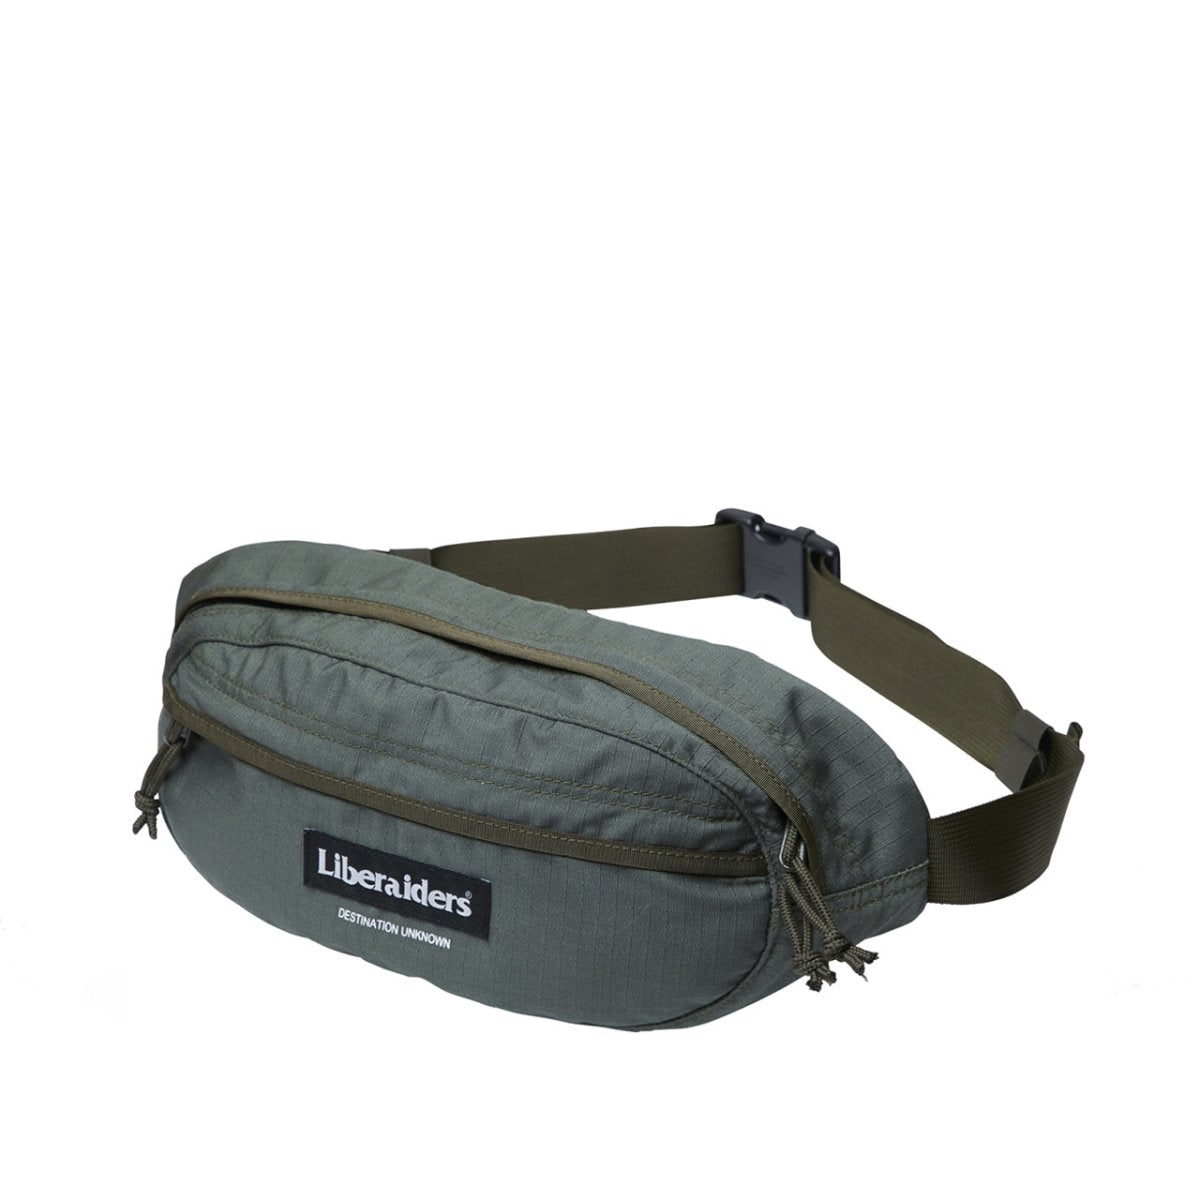 Image of Liberaiders LR Fanny Pack (Olive)